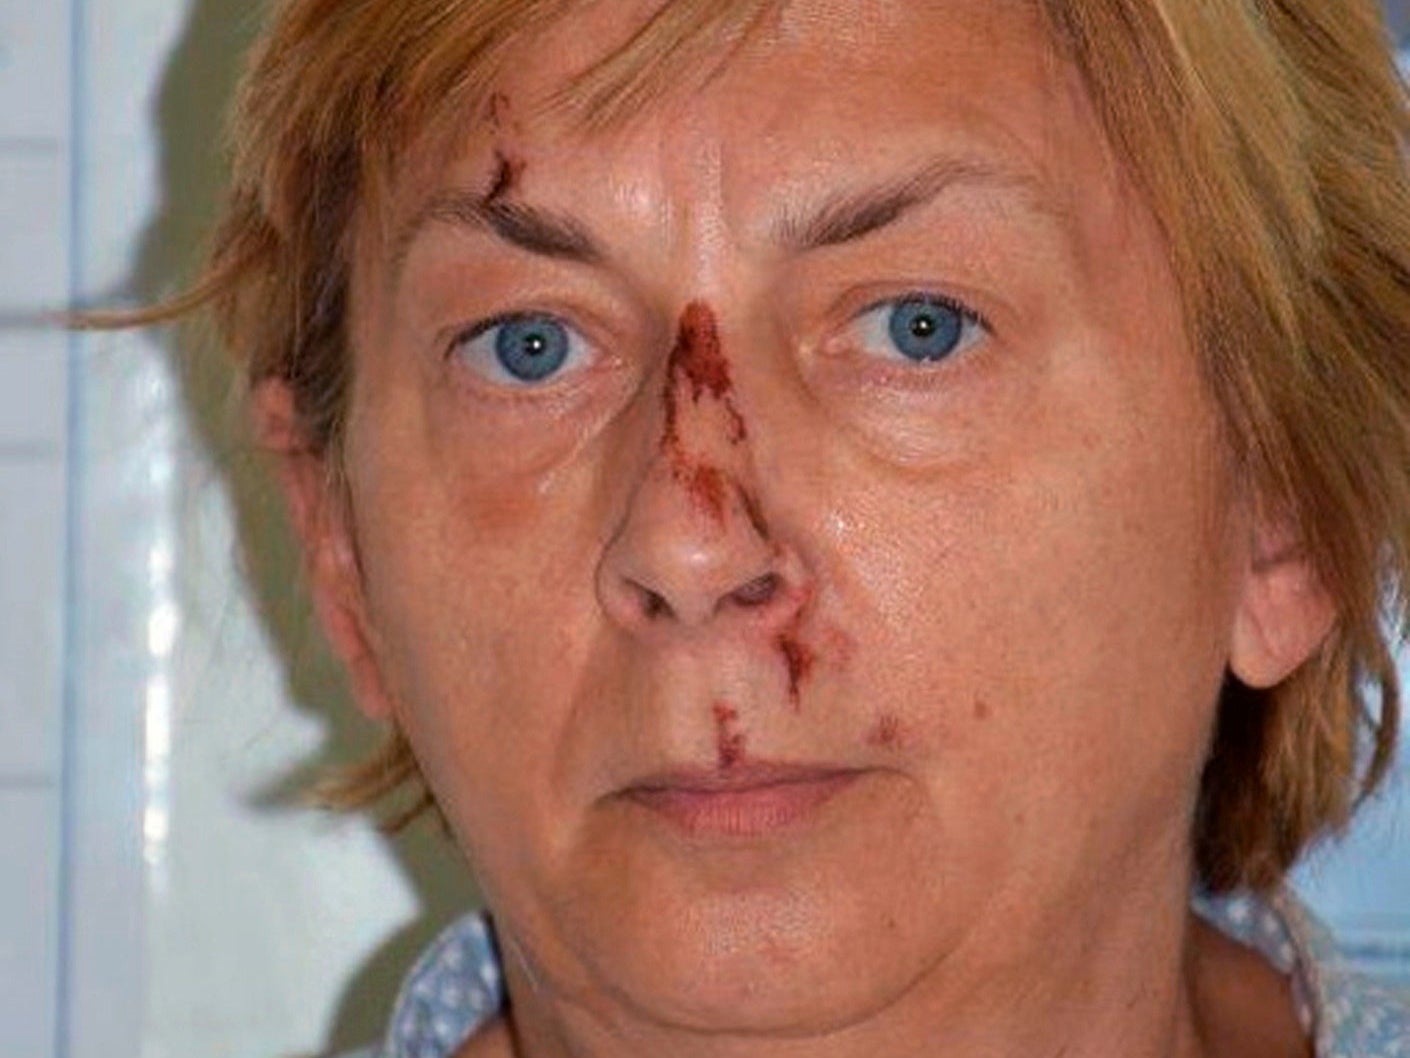 A woman was found with no memory and cuts and bruises on her face on the Croatian island of Krk